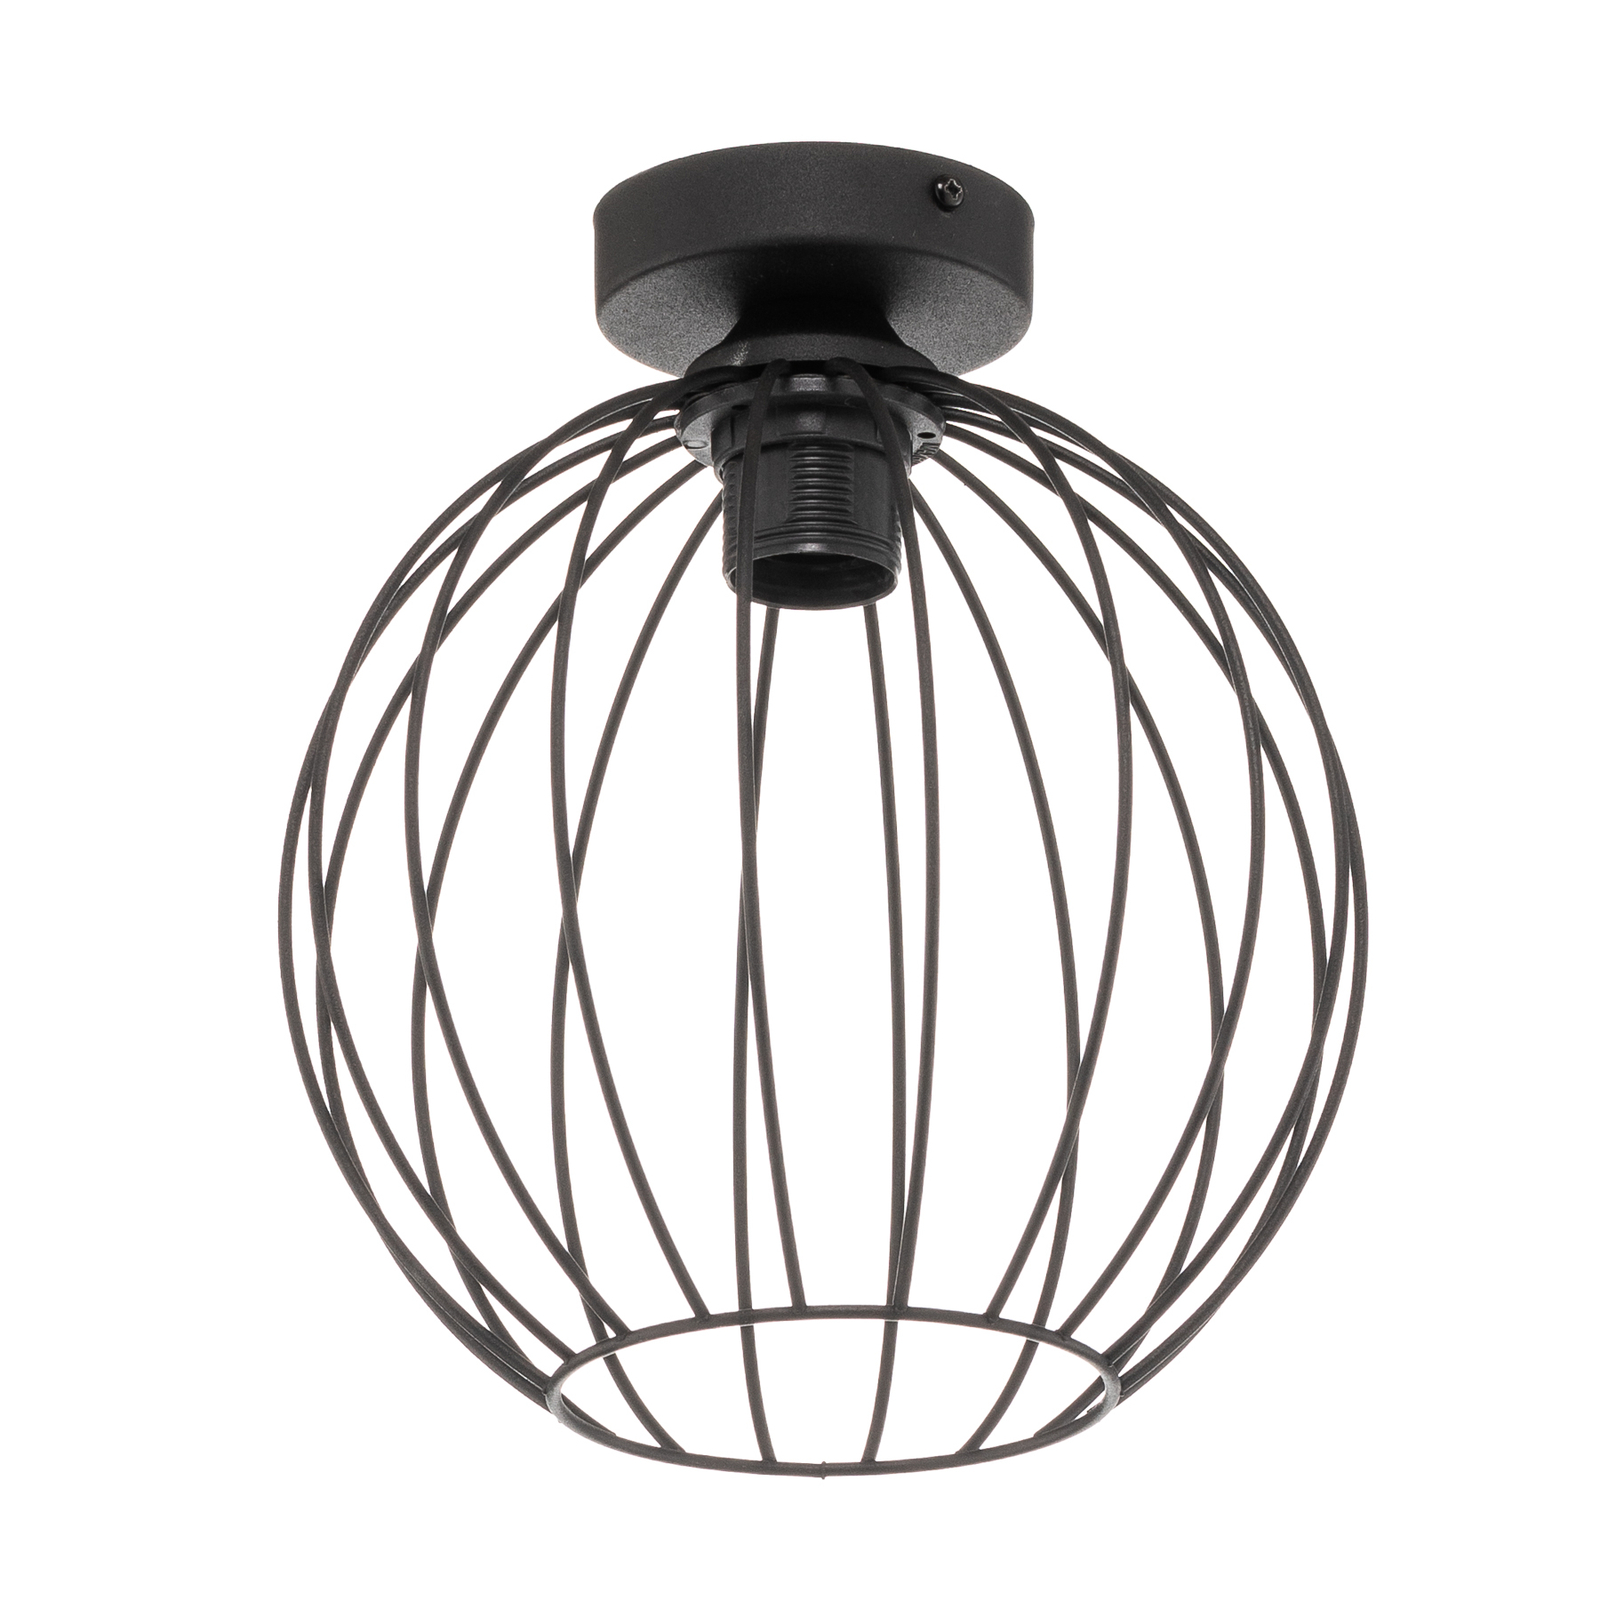 Cumera ceiling lamp with open spherical shade, Ø 24cm